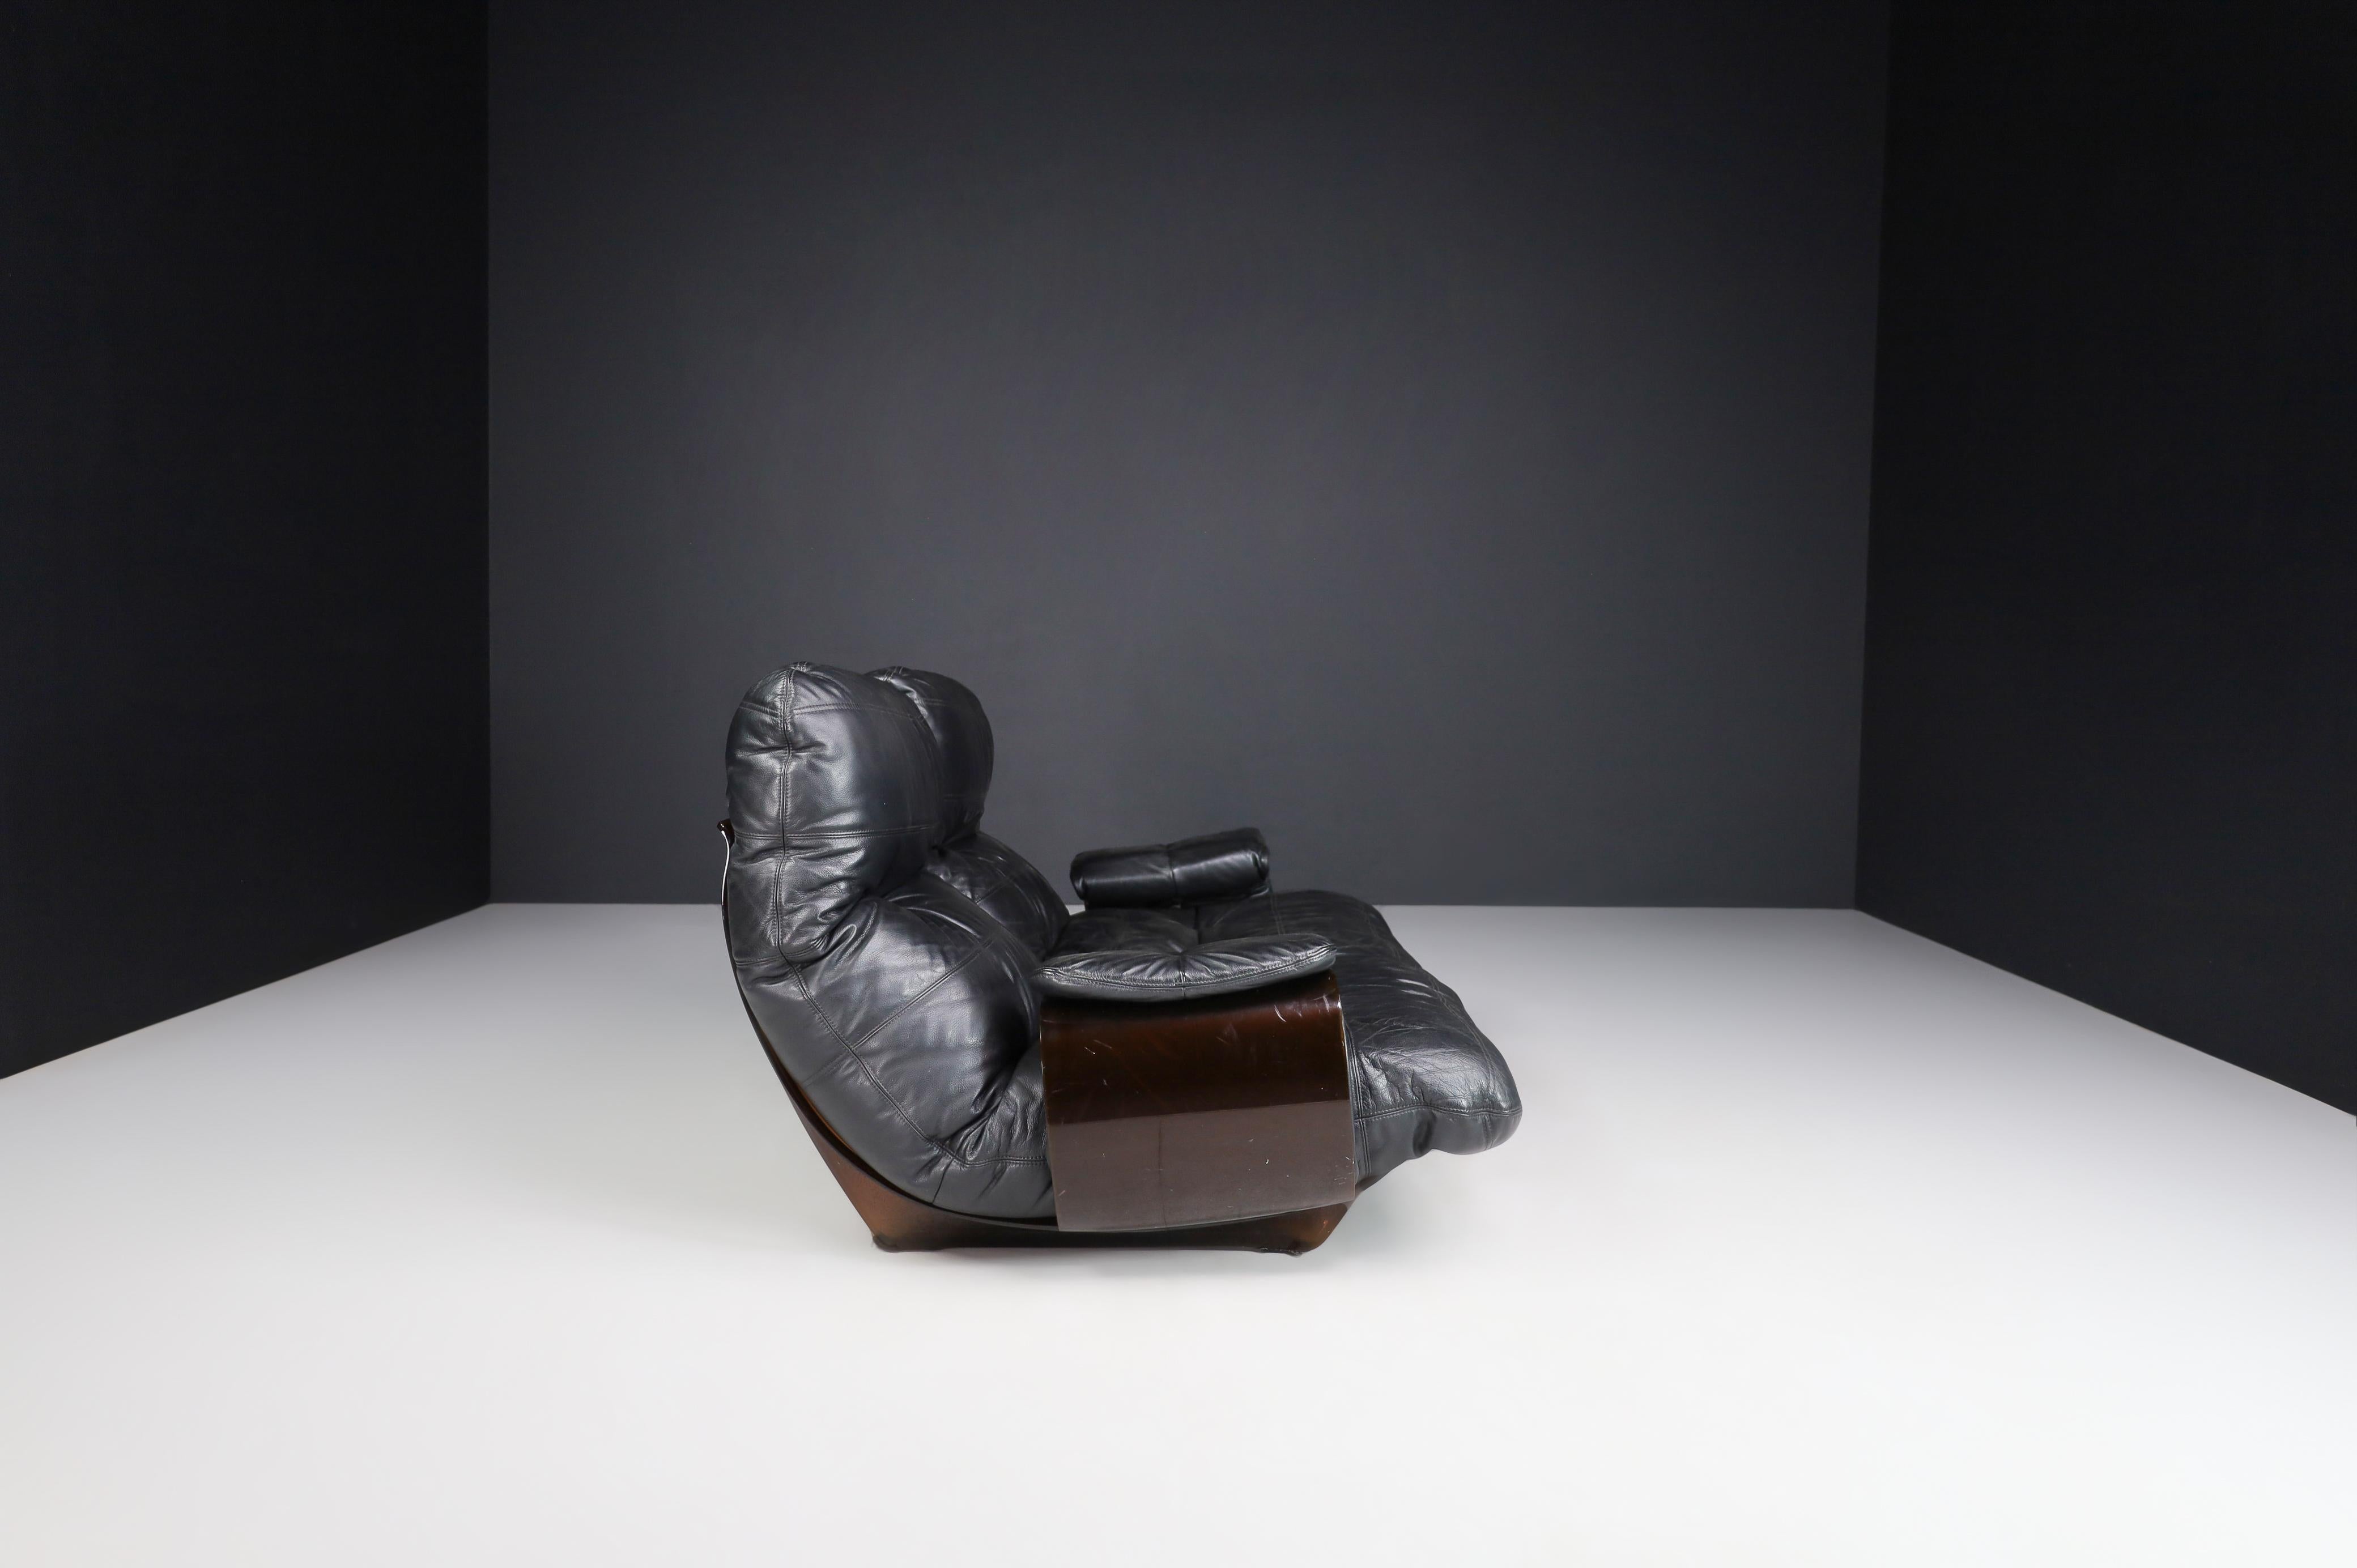 Mid-Century Modern Ligne Roset Marsala Sofa in Black Leather by Michel Ducaroy, France, the 1970s For Sale